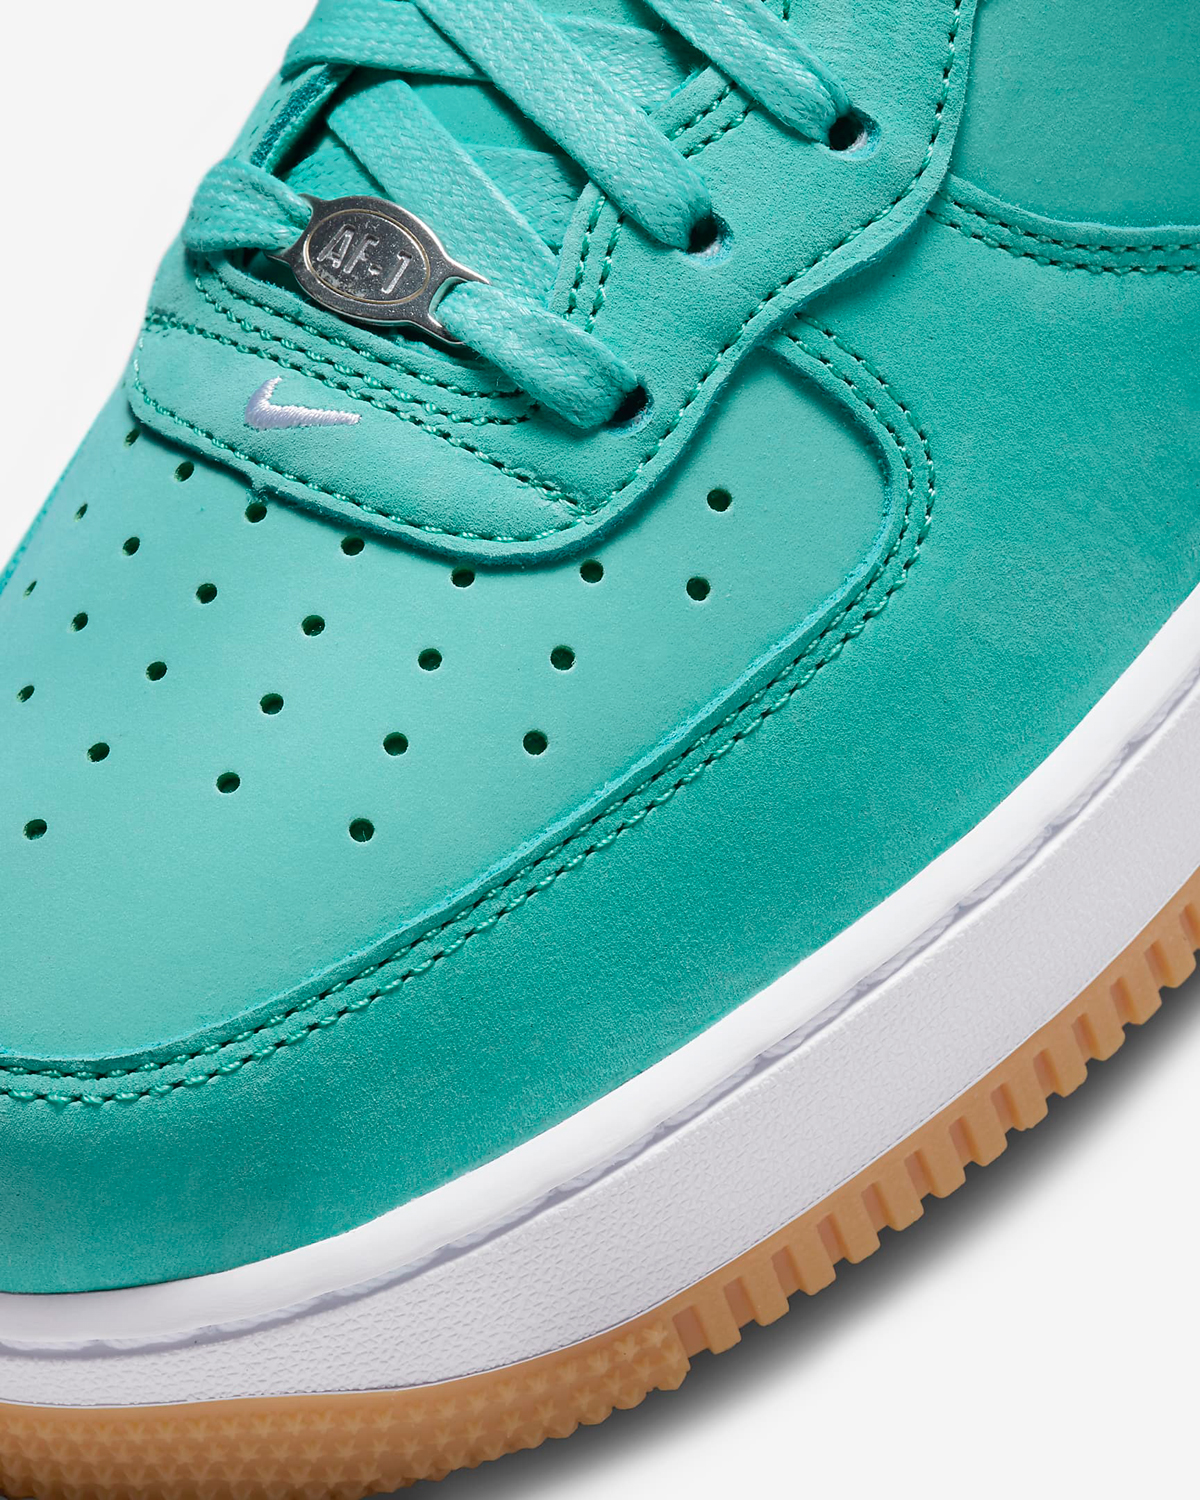 nike-air-force-1-mid-washed-teal-7